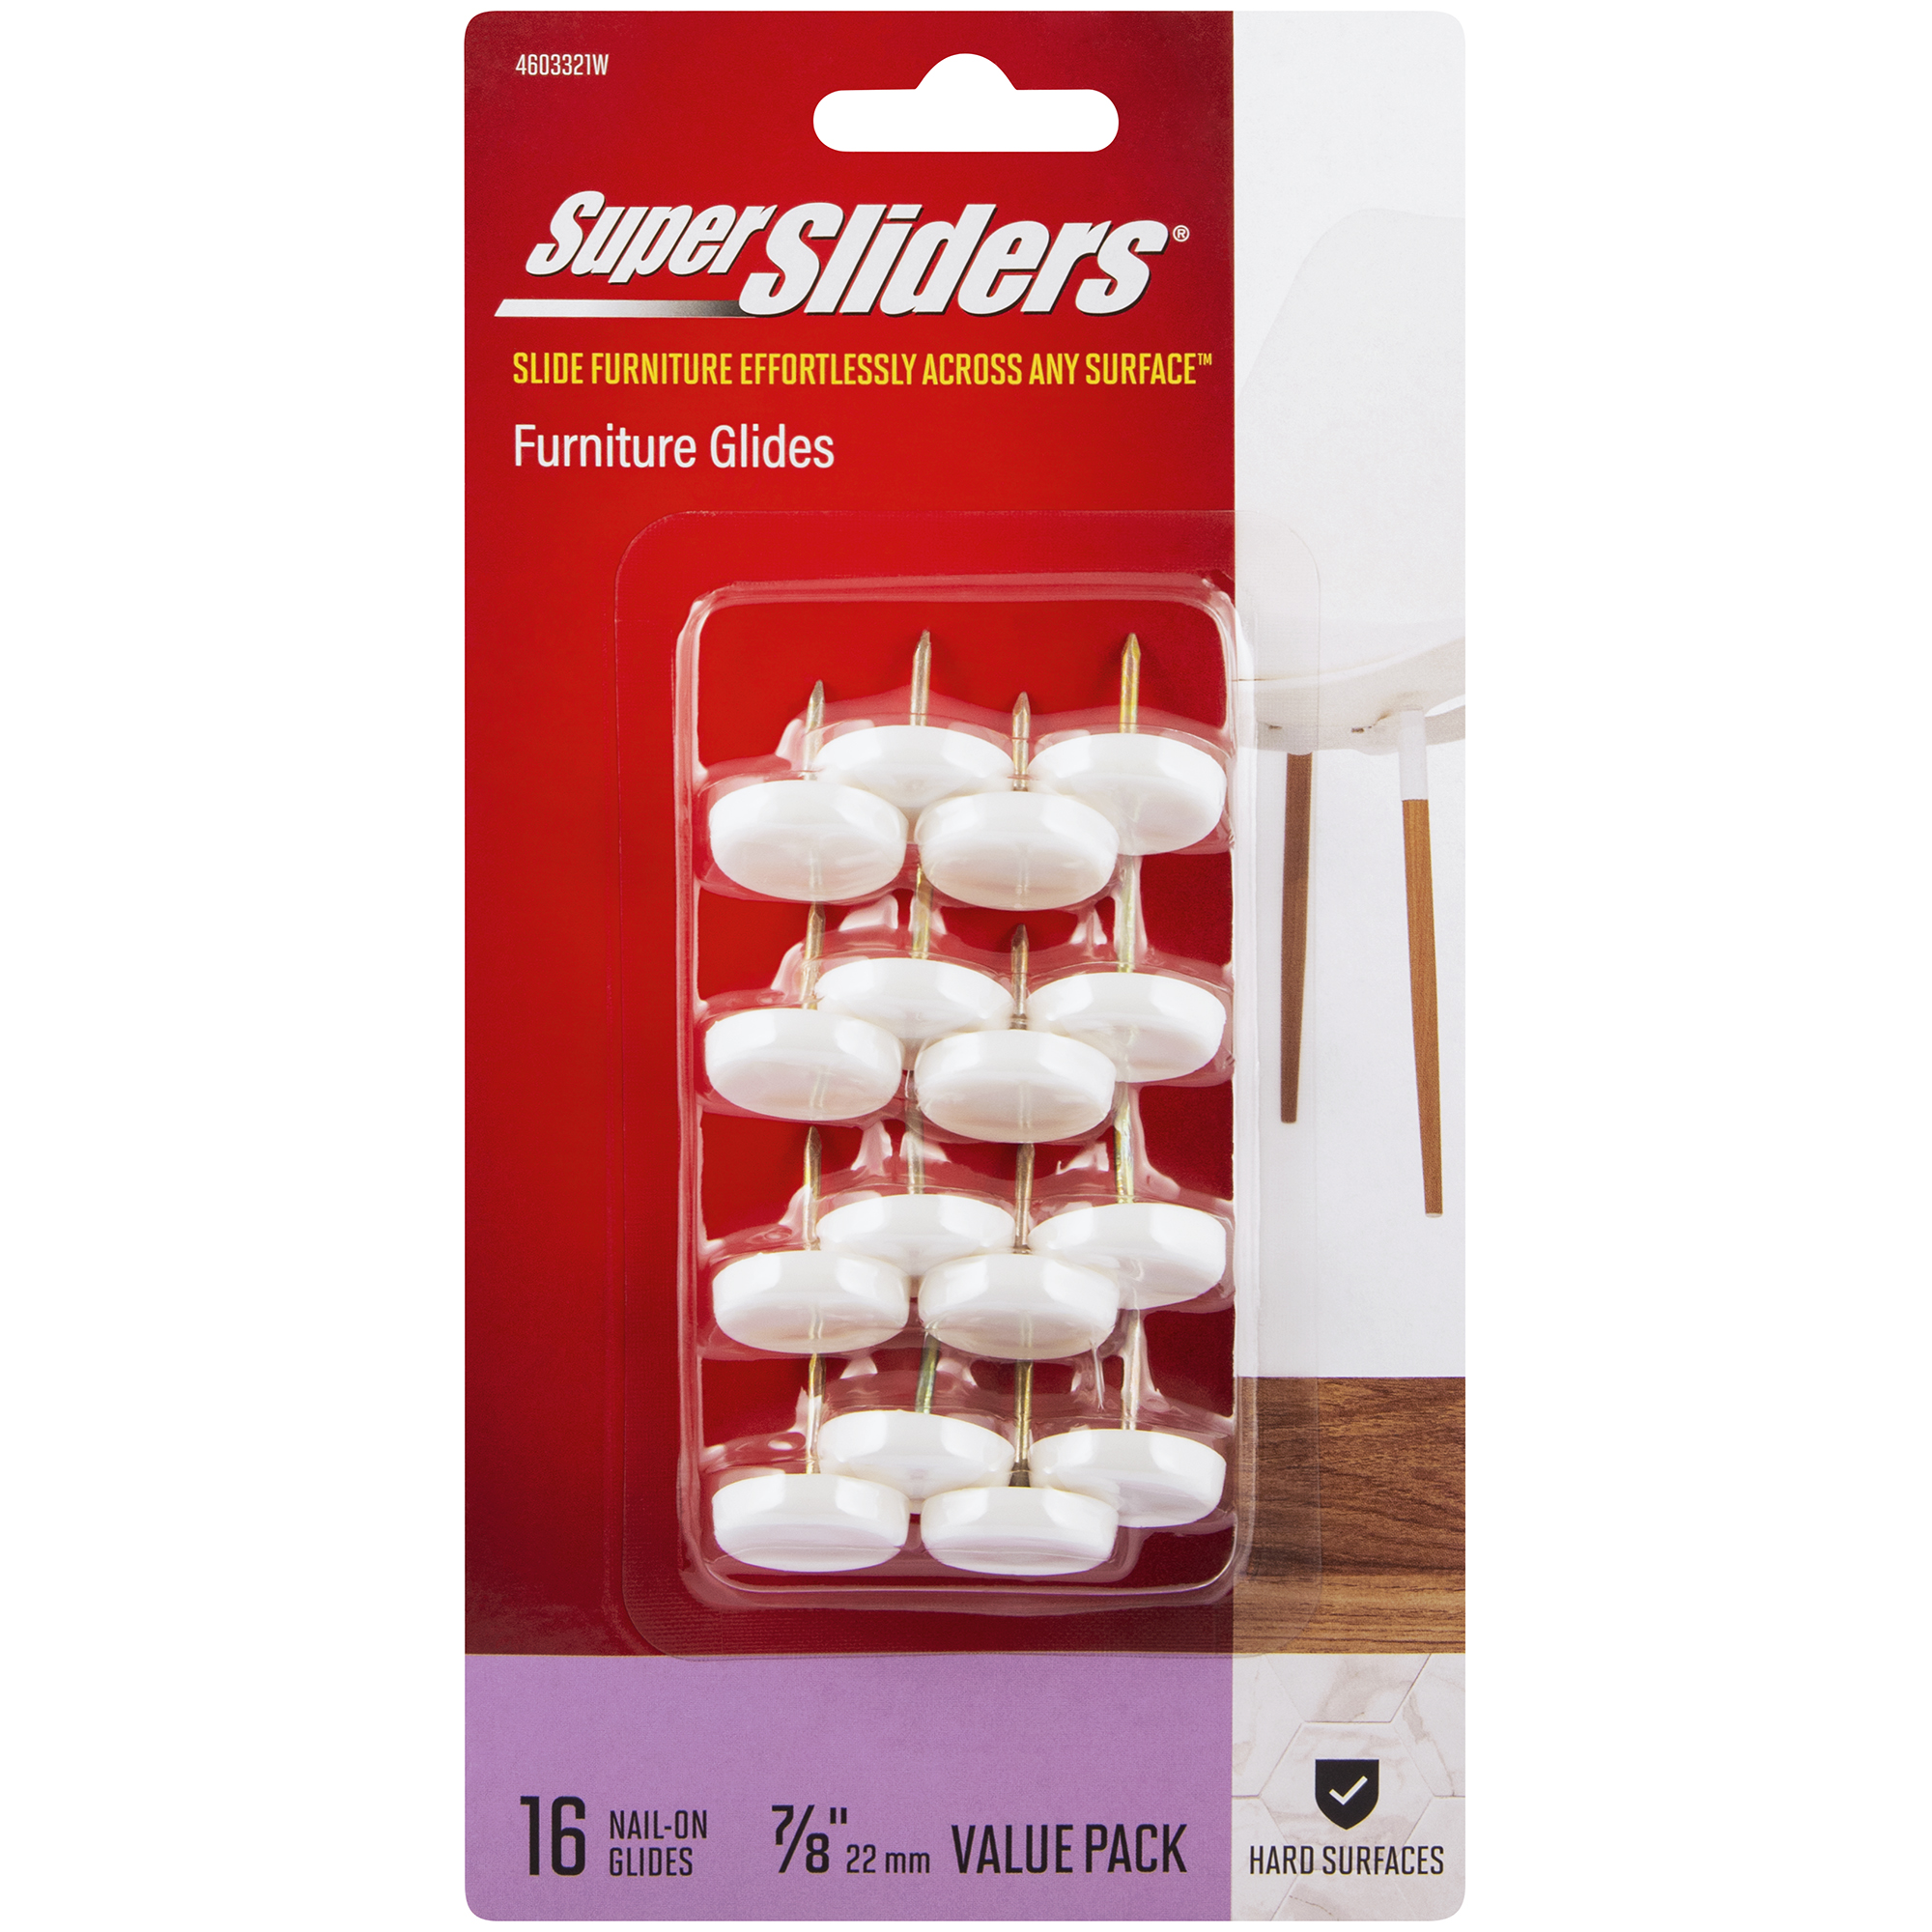 Super Sliders. Size 7/8 inch wide Round Nail on Furniture Glides Plastic, White, 16 Pack - image 1 of 8